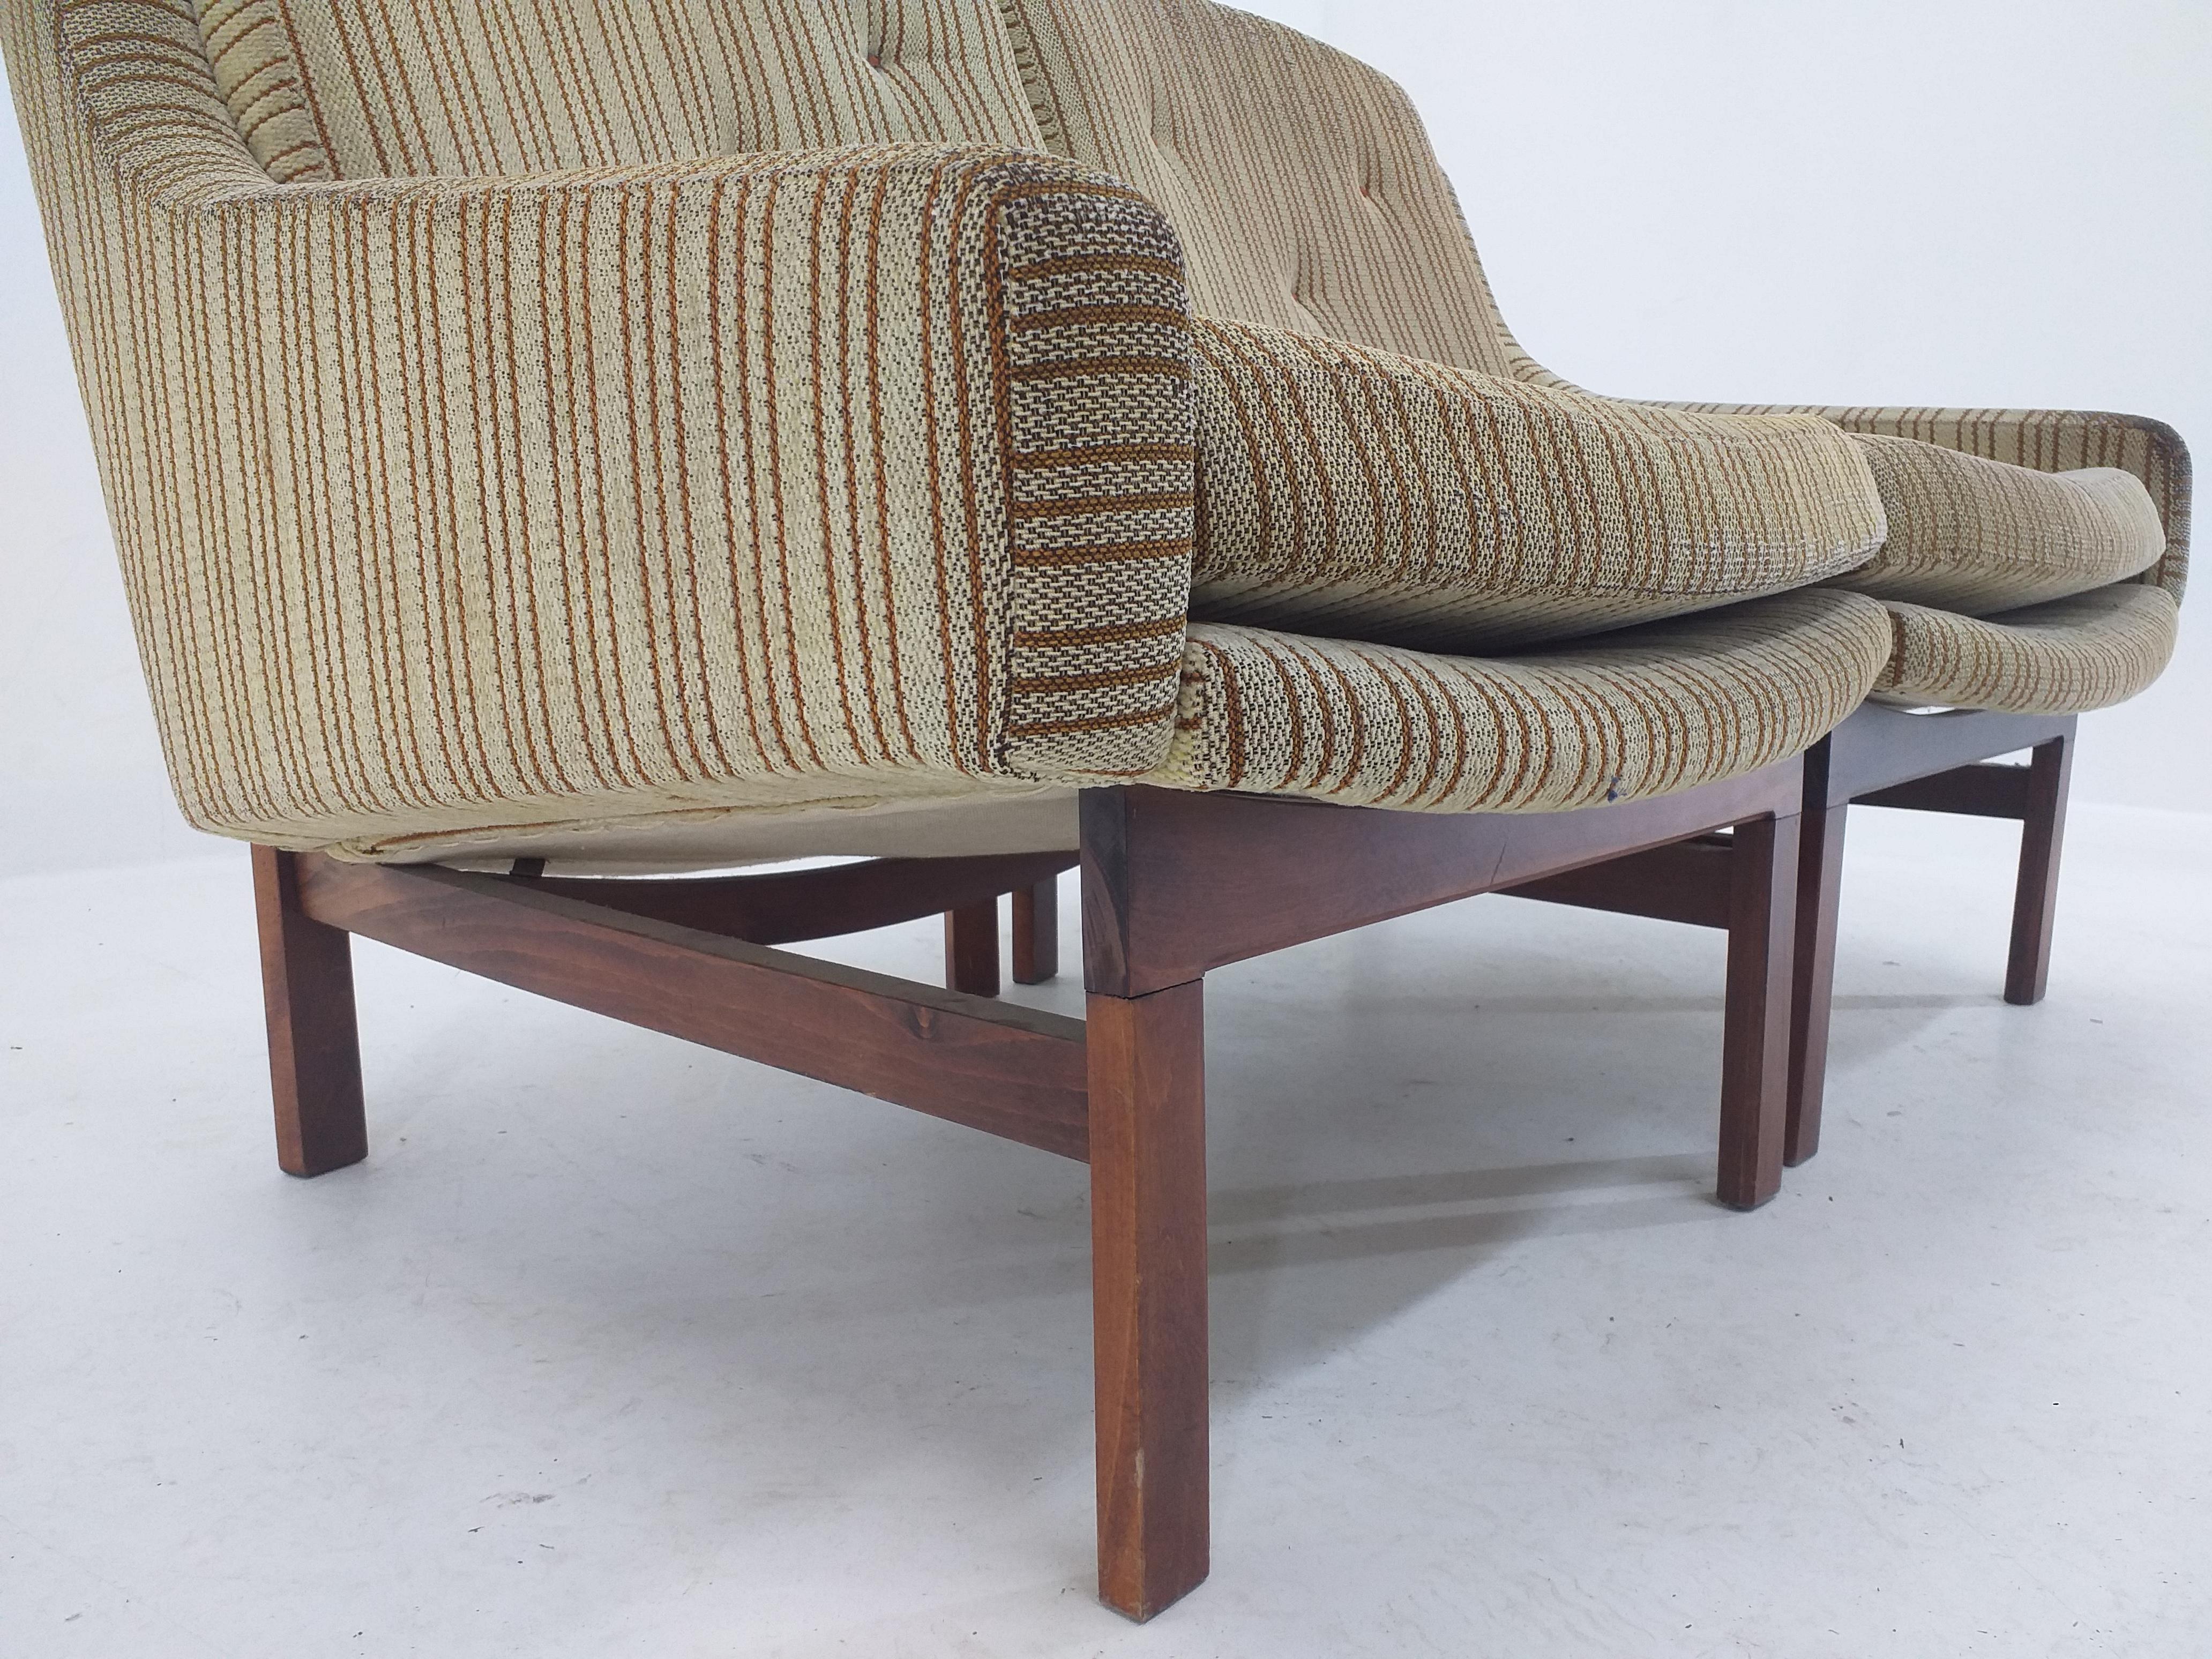 Fabric Midcentury Sofa from Two Chairs, Denmark, 1960s For Sale